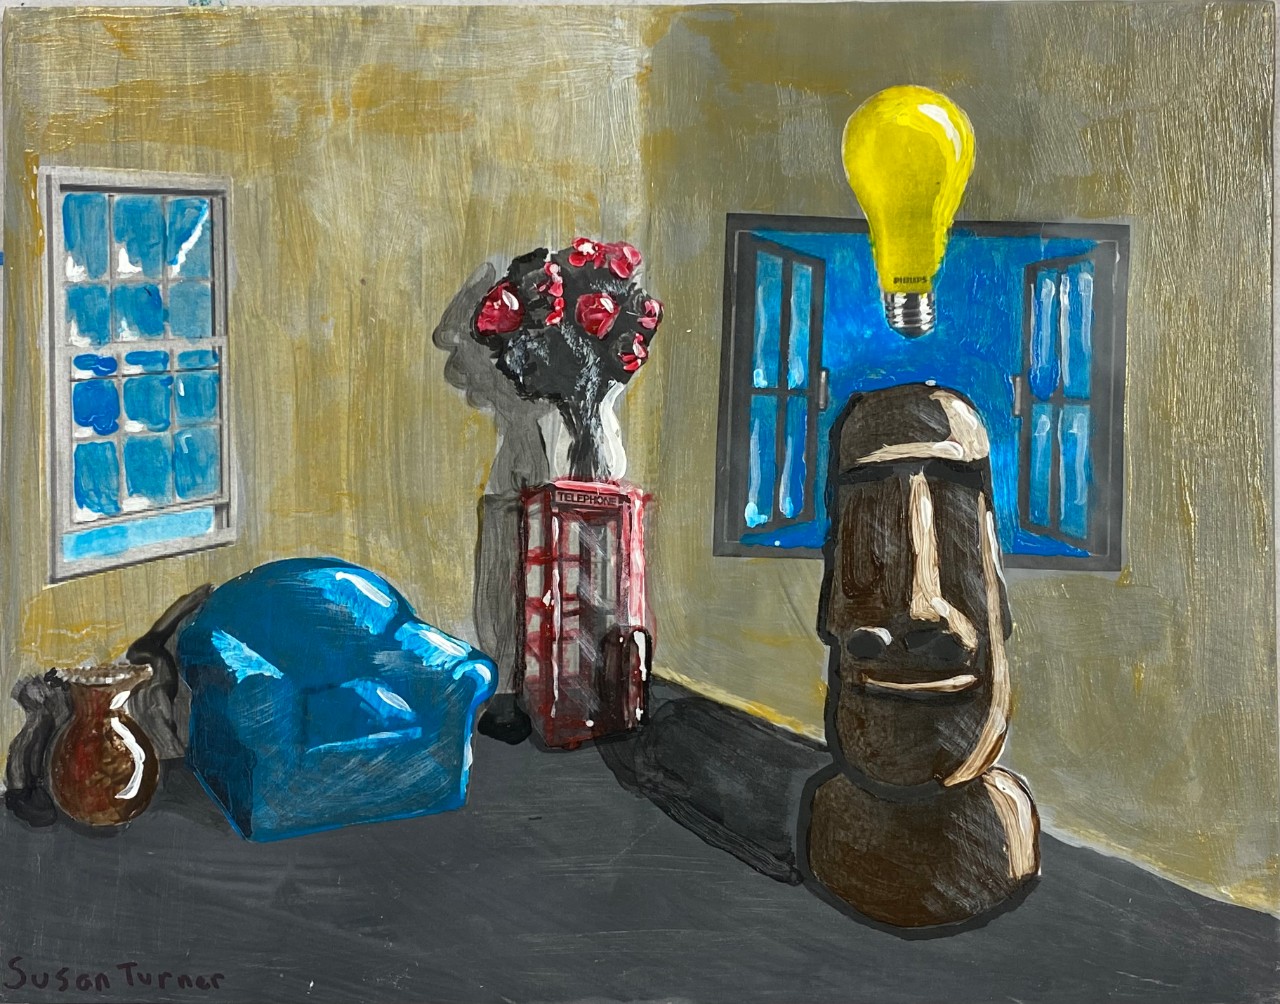 A horizontal painting shows an inside corner of a room with neutral walls, gray floor, and two windows – one wide open to the blue beyond. Inside the room is a large vase next to a blue arm chair, a red phone booth with a bouquet of red flowers atop, and an Easter Island-style statue of a face, with a large, bright yellow lightbulb suspended above. 